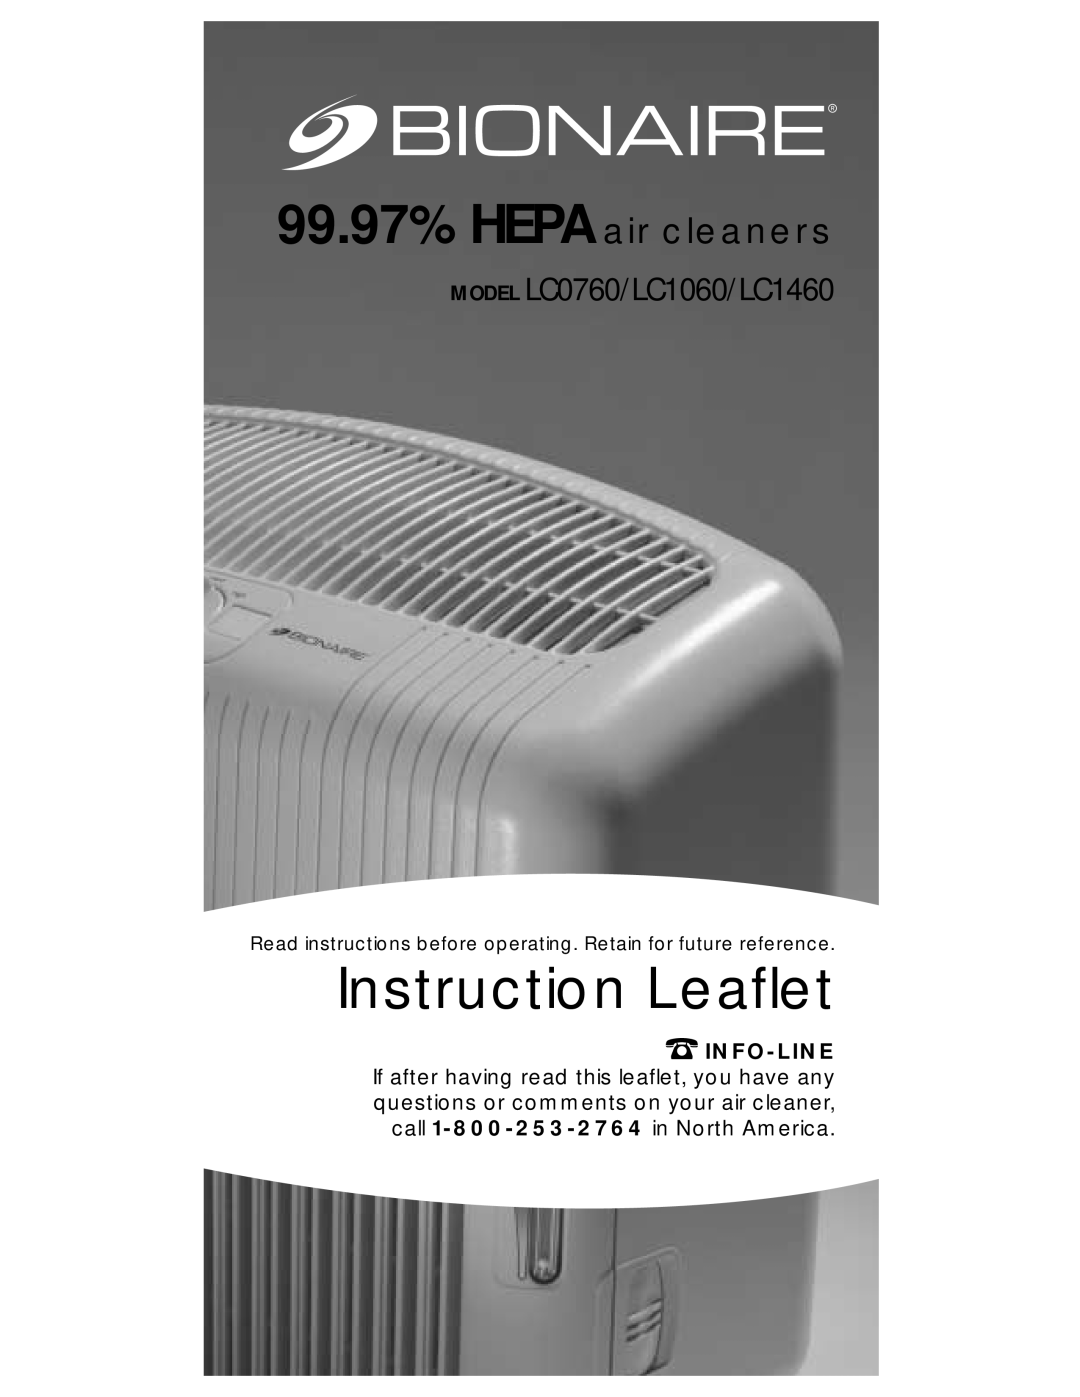 Sharp manual Info-Line, 99.97% HEPA air cleaners, Instruction Leaflet, MODEL LC0760/LC1060/LC1460 